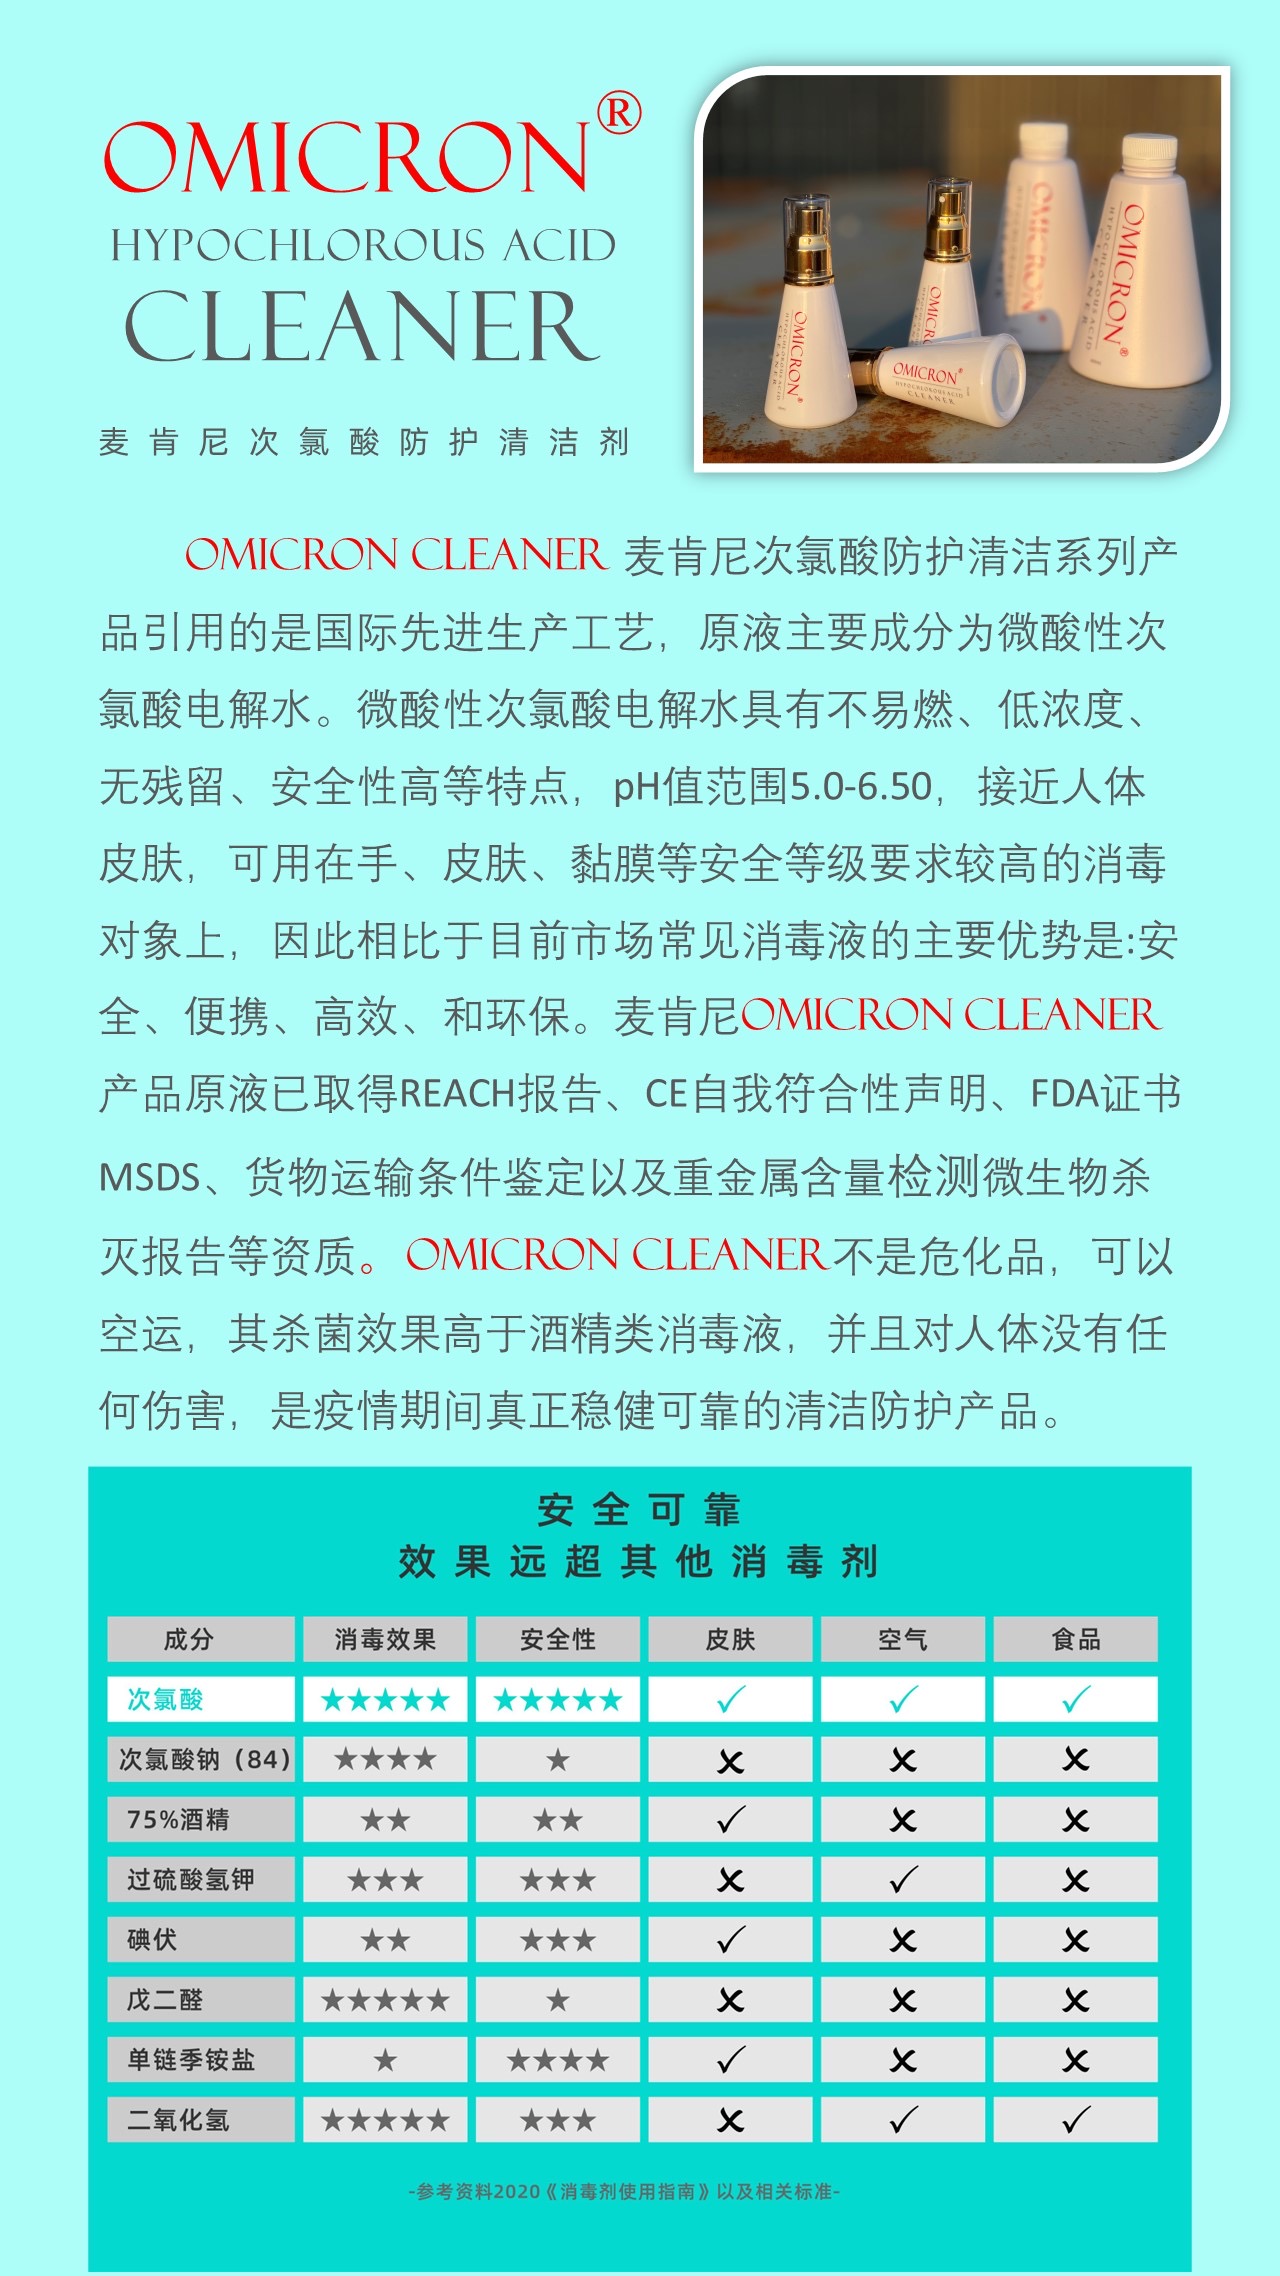 OMICRON CLEANER麦肯尼次氯酸补充液